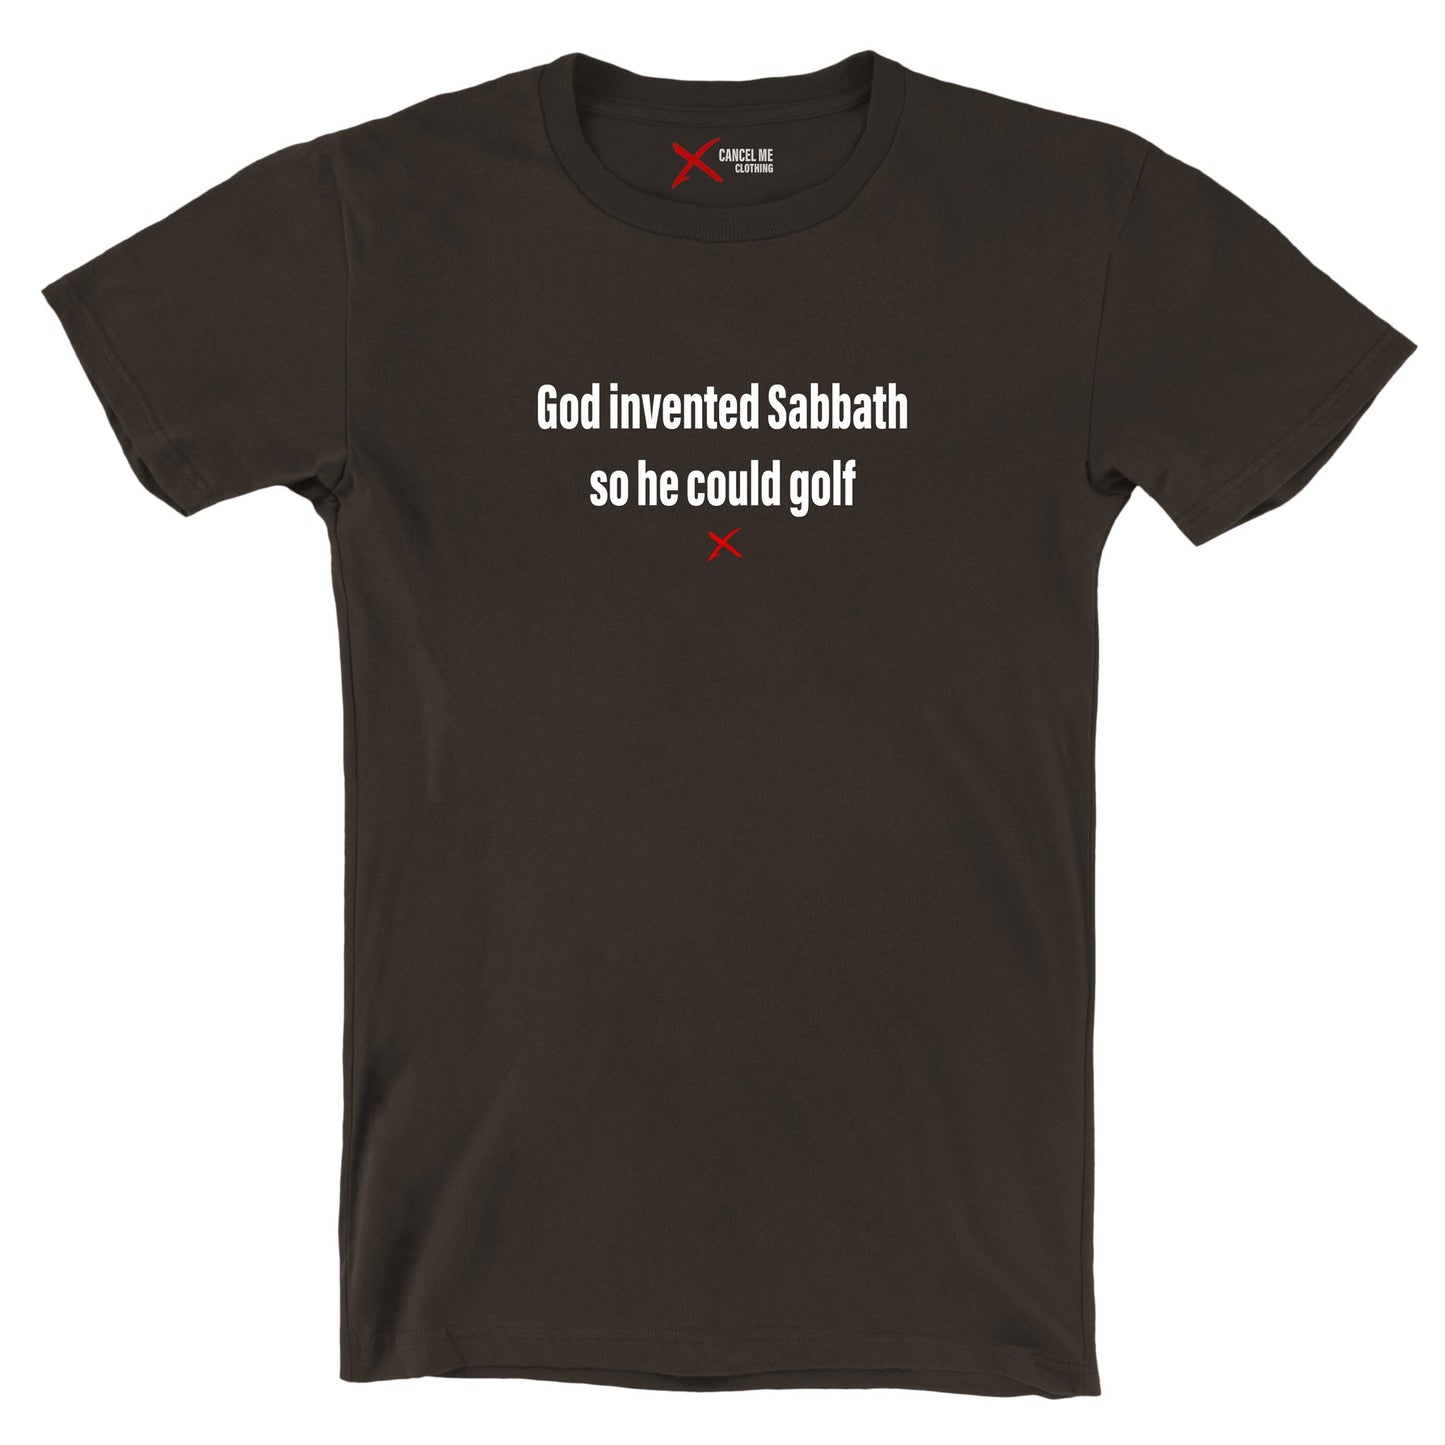 God invented Sabbath so he could golf - Shirt